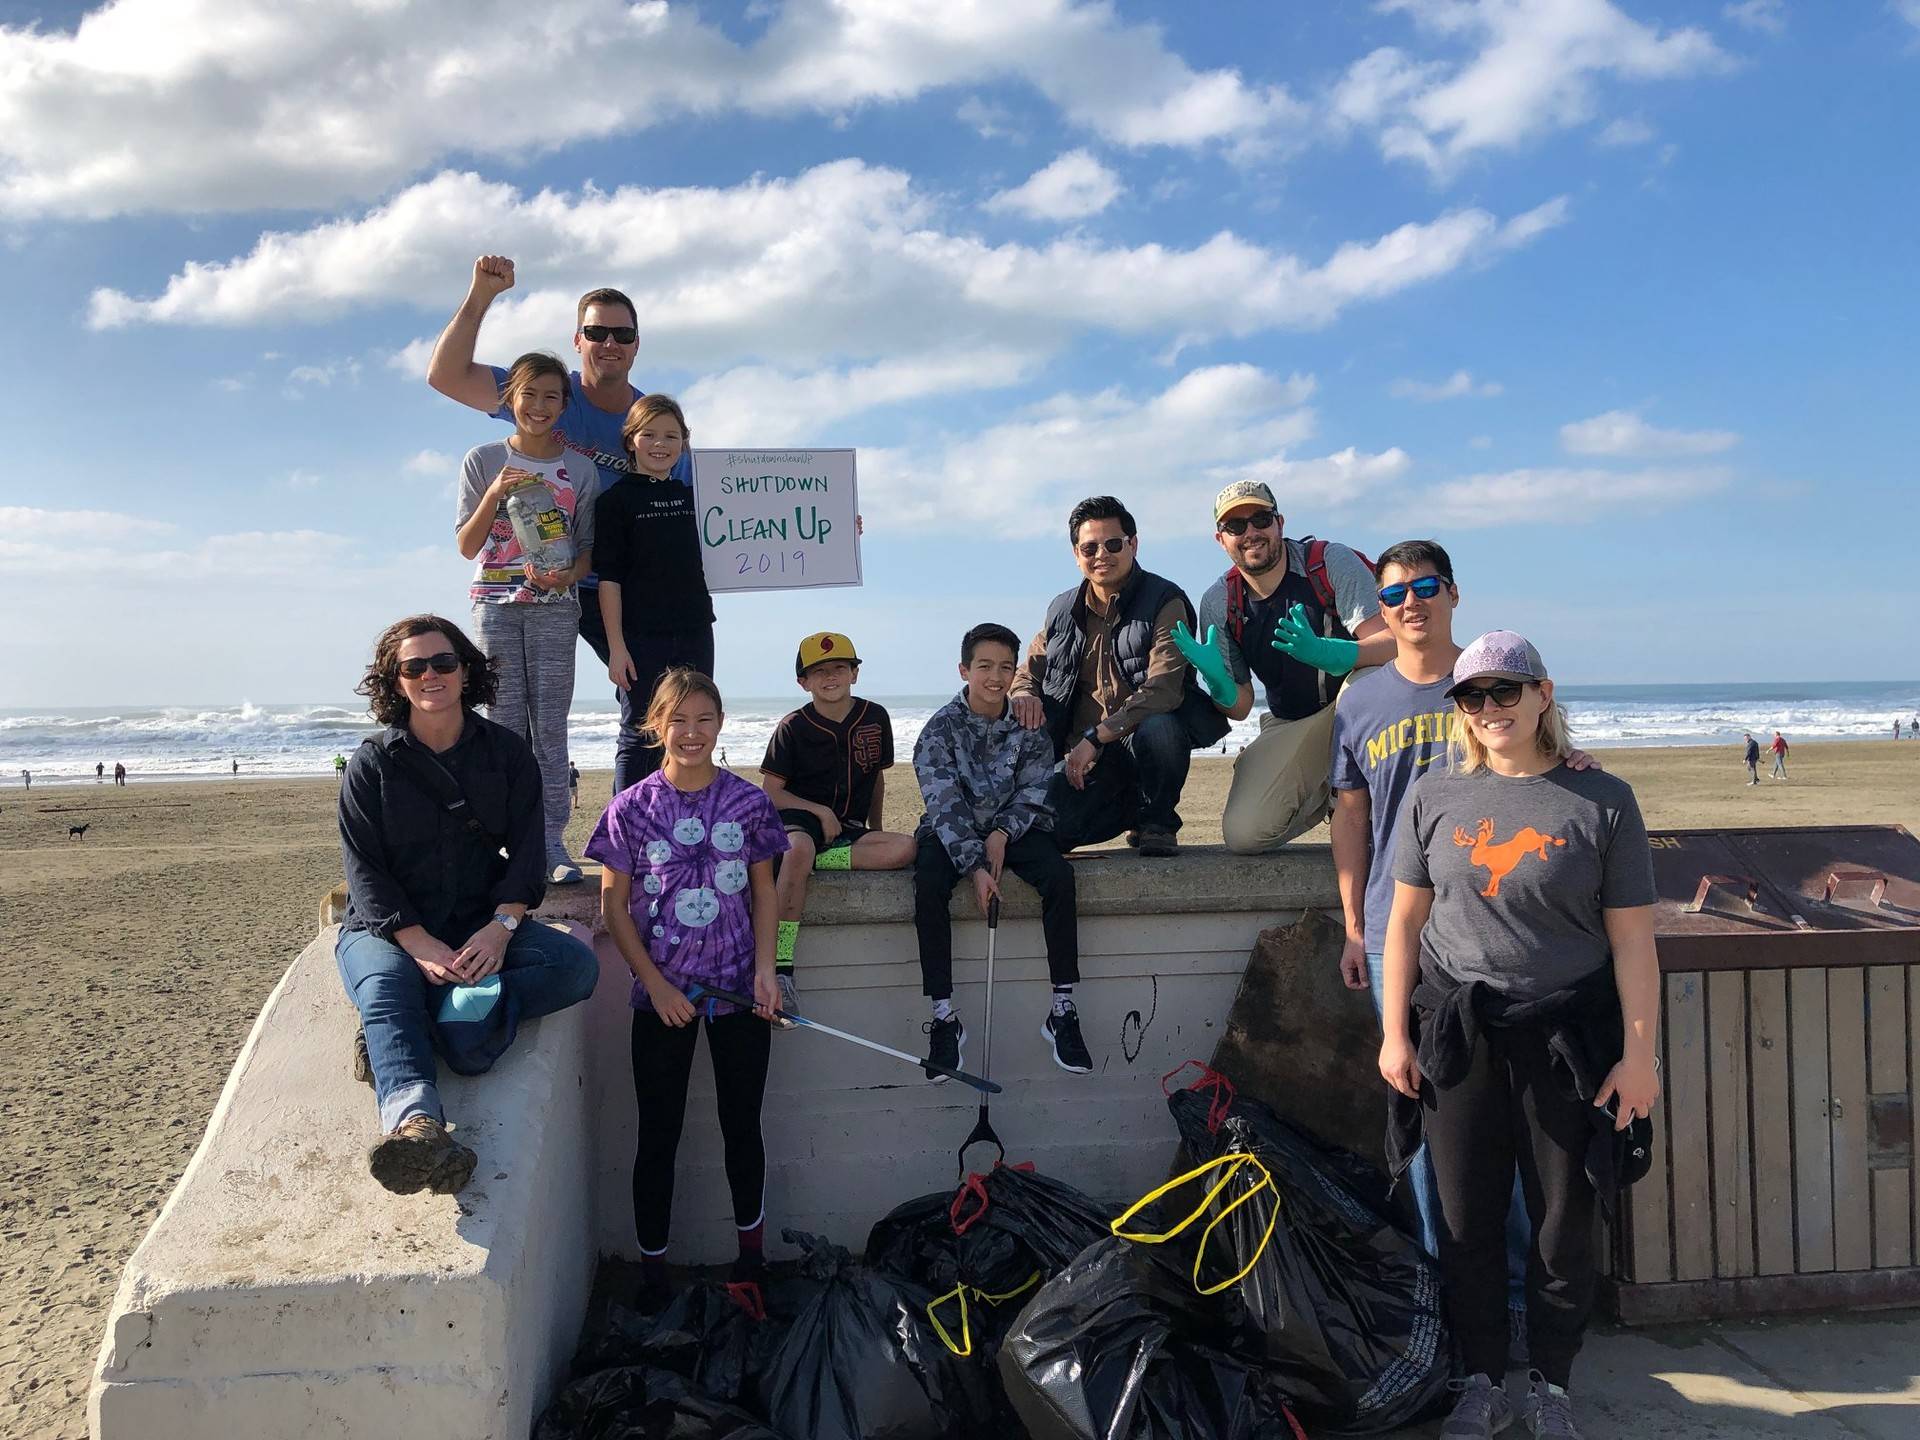 Volunteers picked up trash at Ocean Beach on Jan. 17, 2019, in a cleanup organized by #ShutdownCleanup. Courtesy ShutdownCleanup